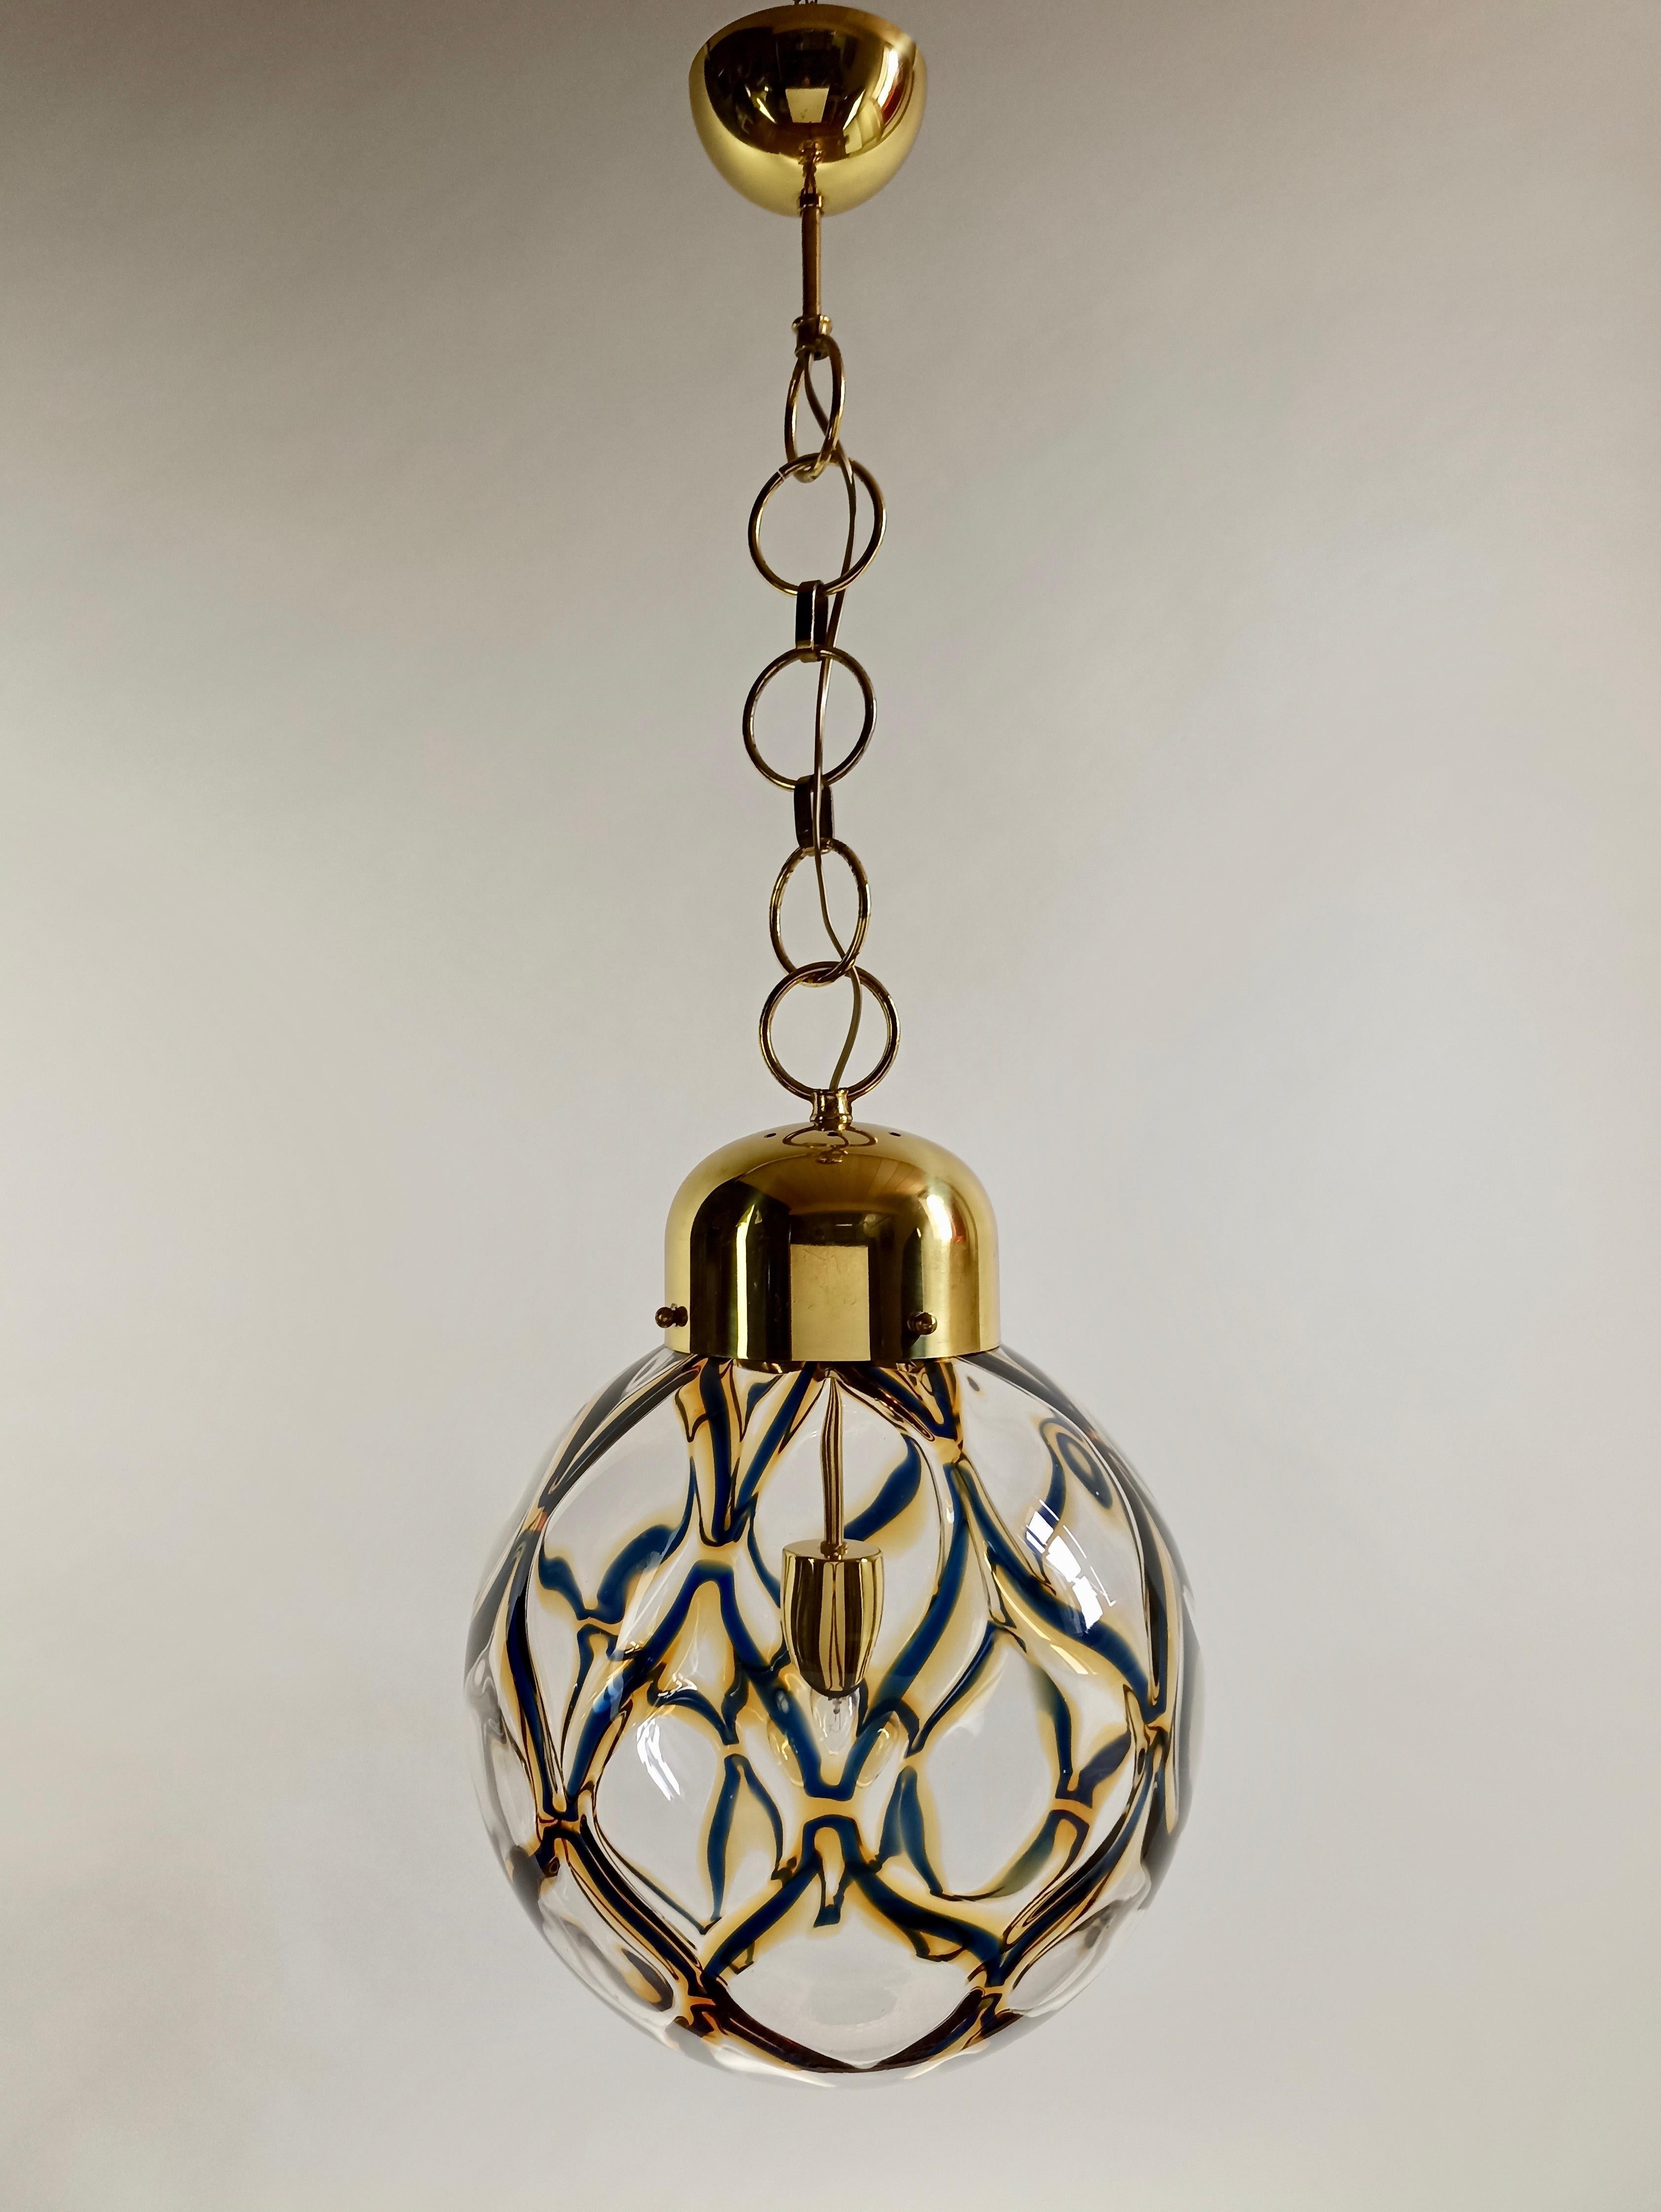 Charming and rare Italian Space Age 1970s Toni Zuccheri attributable Murano pendant lamp, in clear hand-blown art glass with a yellow and blue pattern to create a cage-like design reminiscent of Venetian lanterns.
Gilded metal frame.
Weight: 4,6